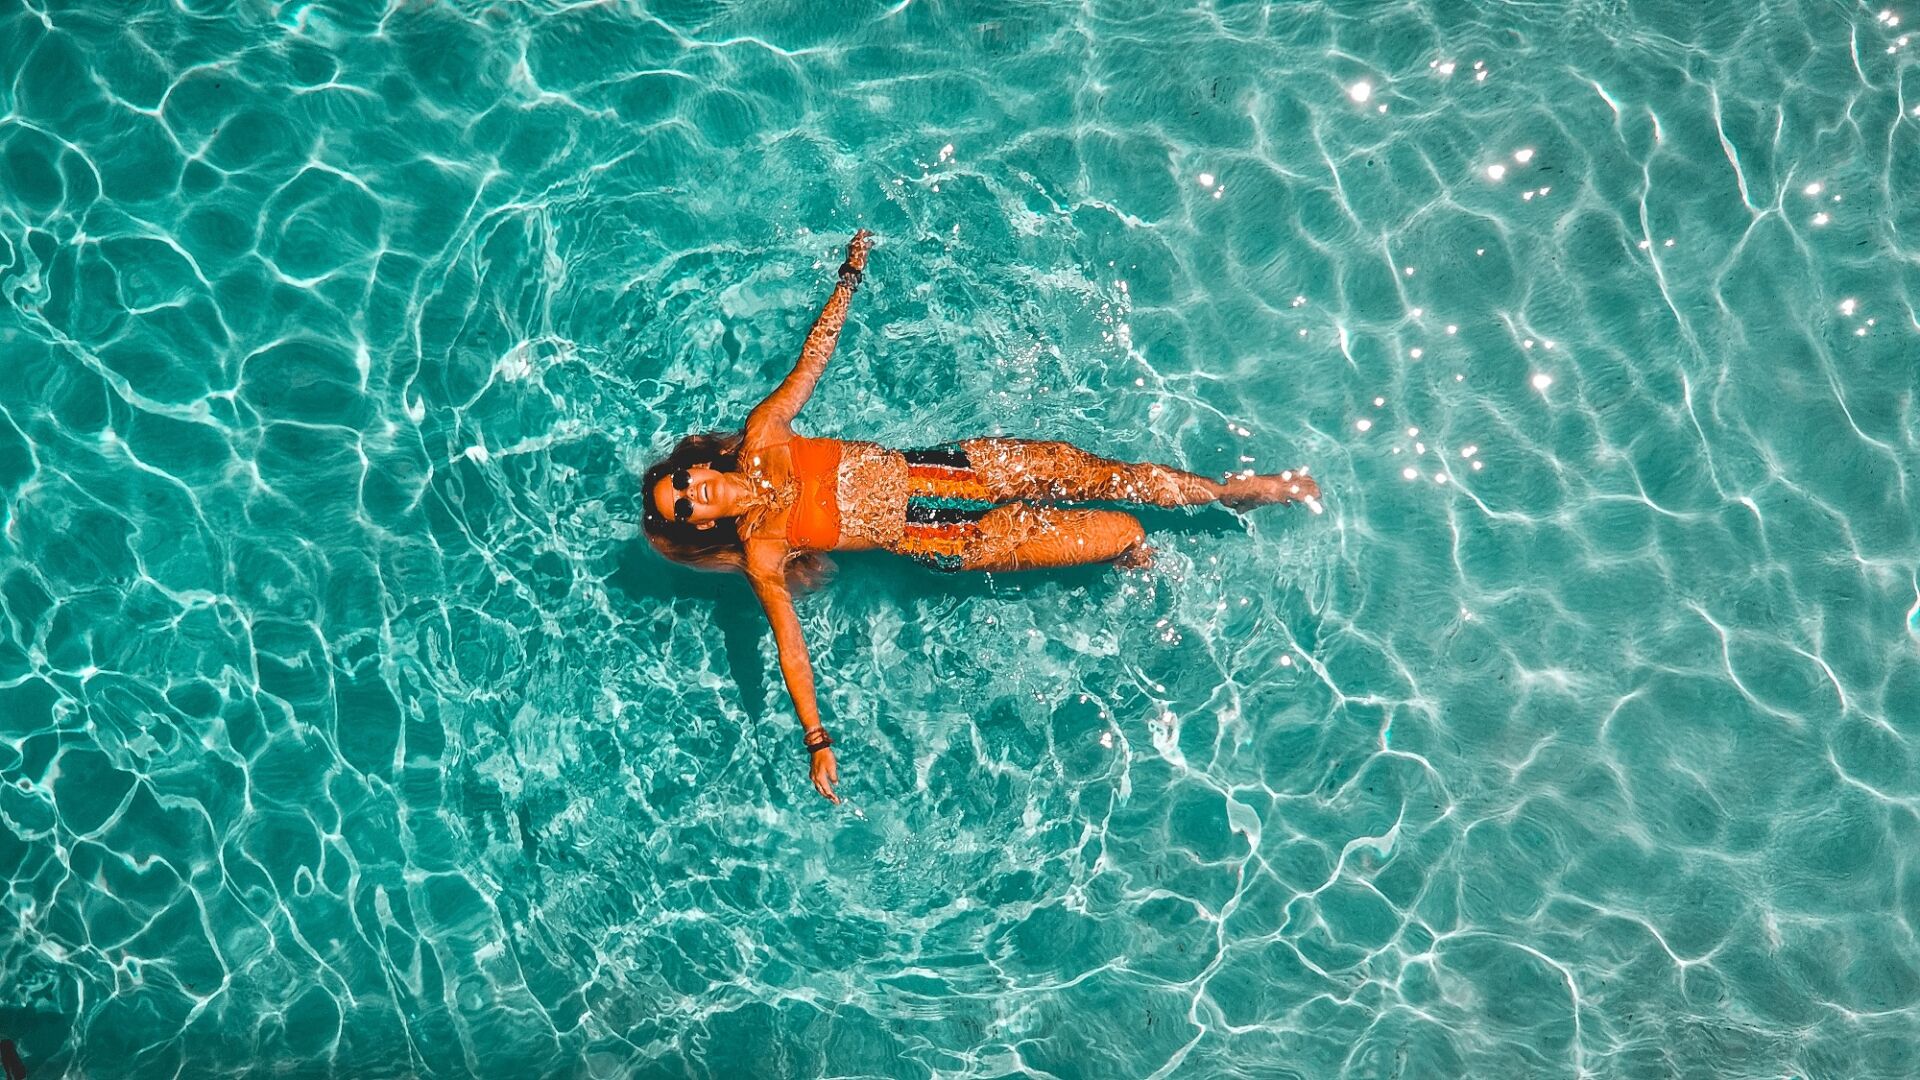 woman floating in water